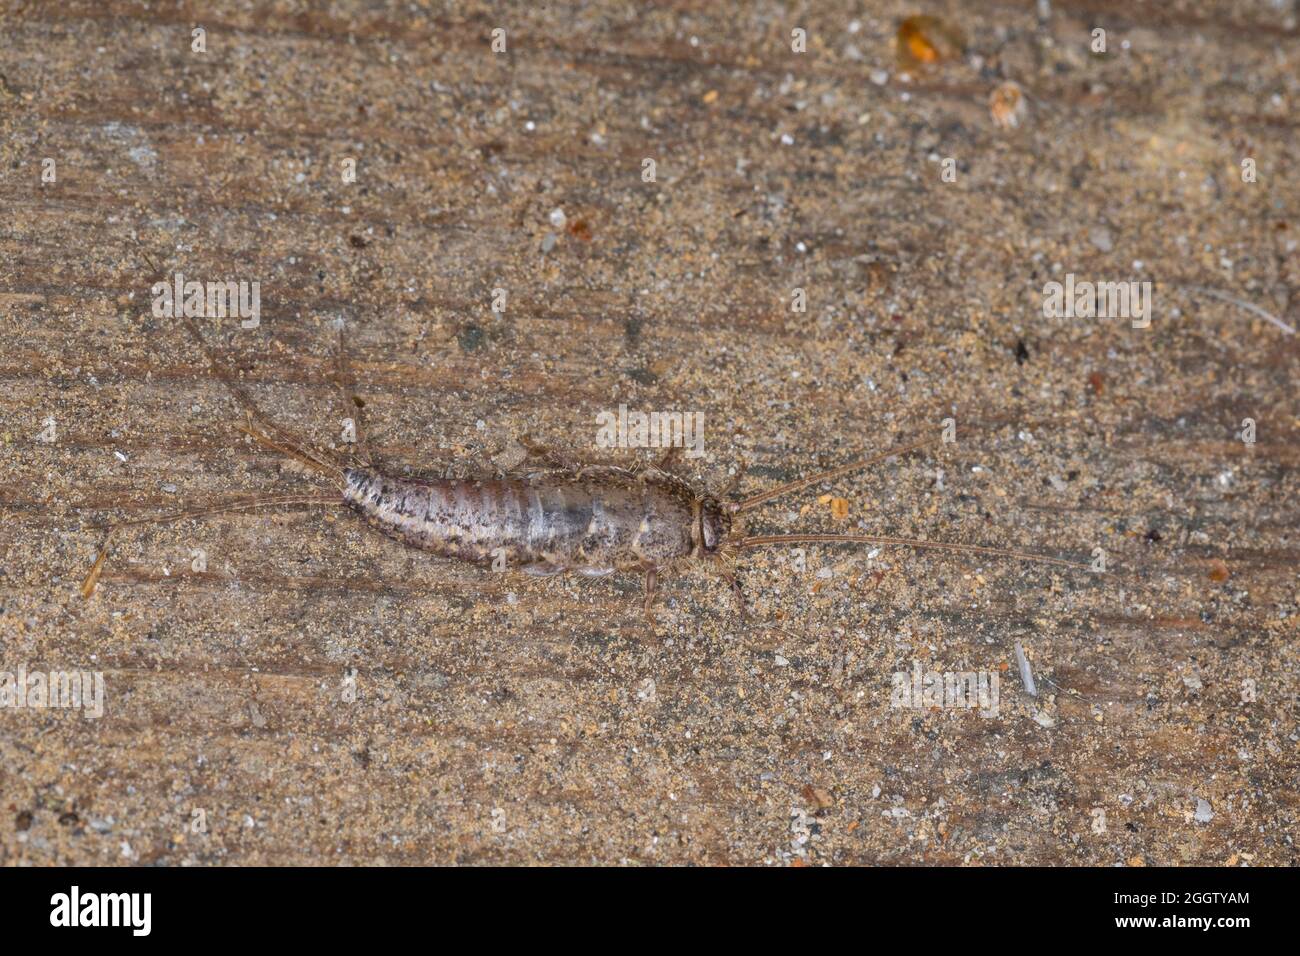 four-lined silverfish (Ctenolepisma lineata, Ctenolepisma lineatum), top view, Germany Stock Photo